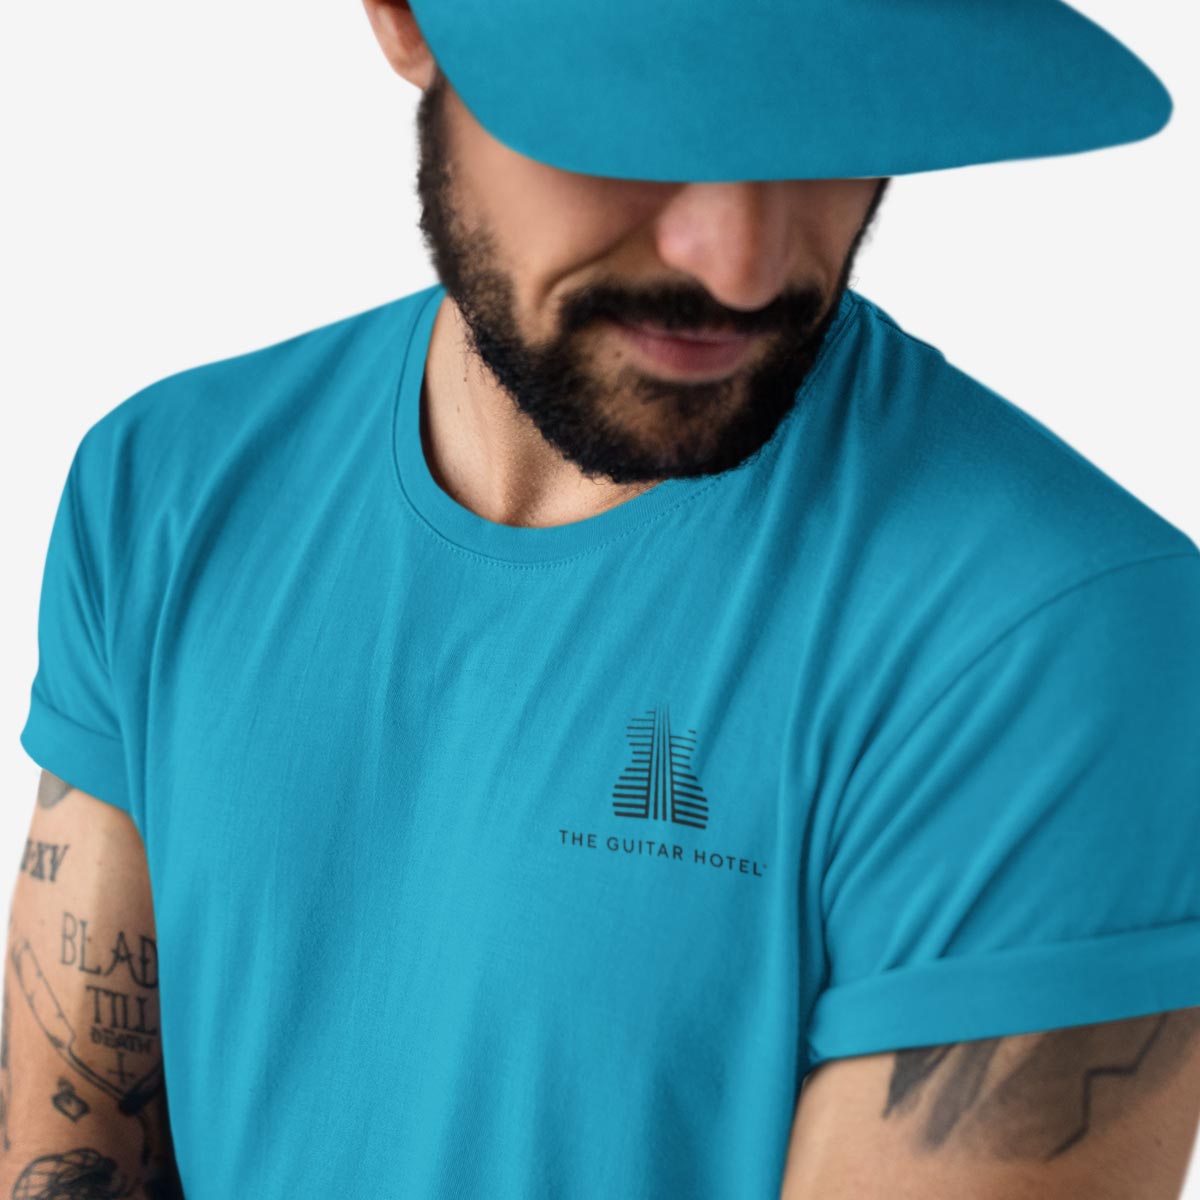 Guitar Hotel Adult Fit Tee in Aqua with Reflection Design image number 5